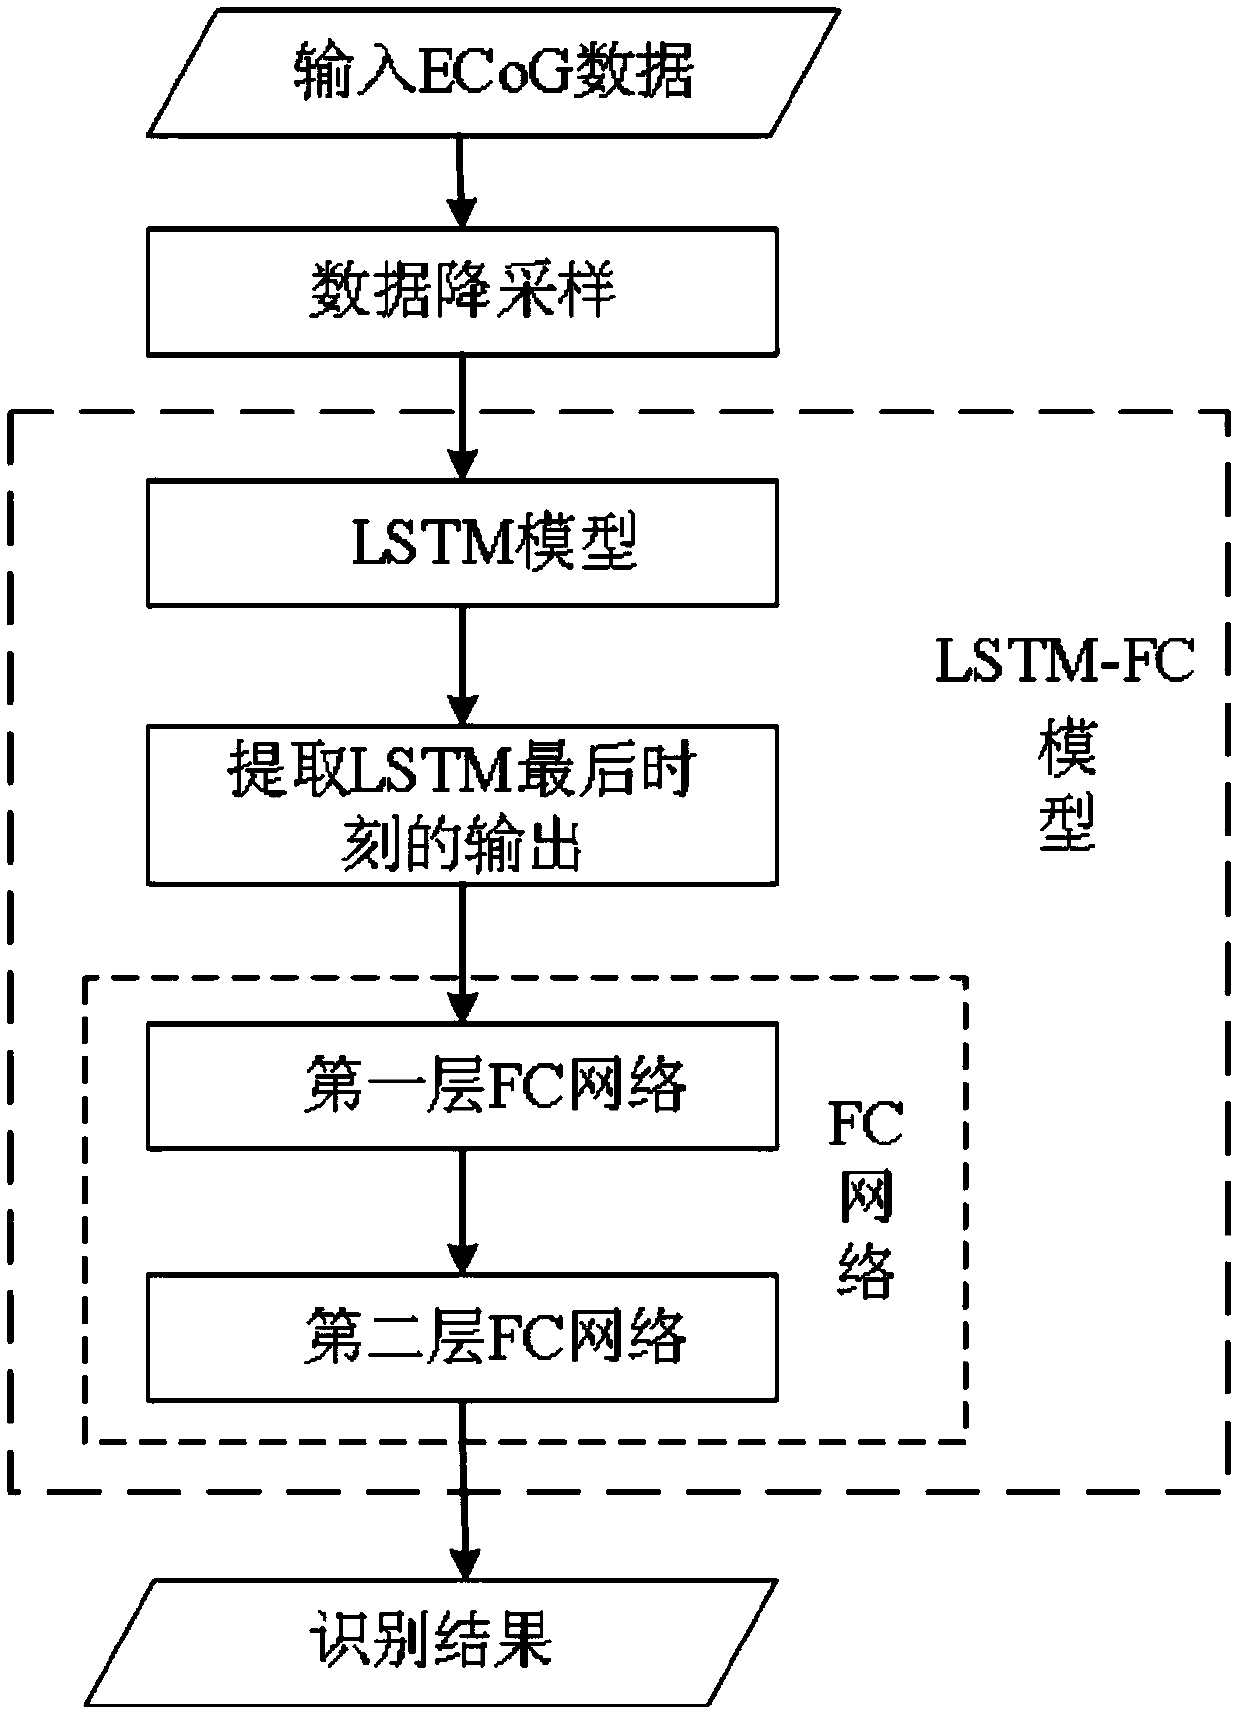 electroencephalogram signal feature extraction and classification recognition method based on LSTM-FC